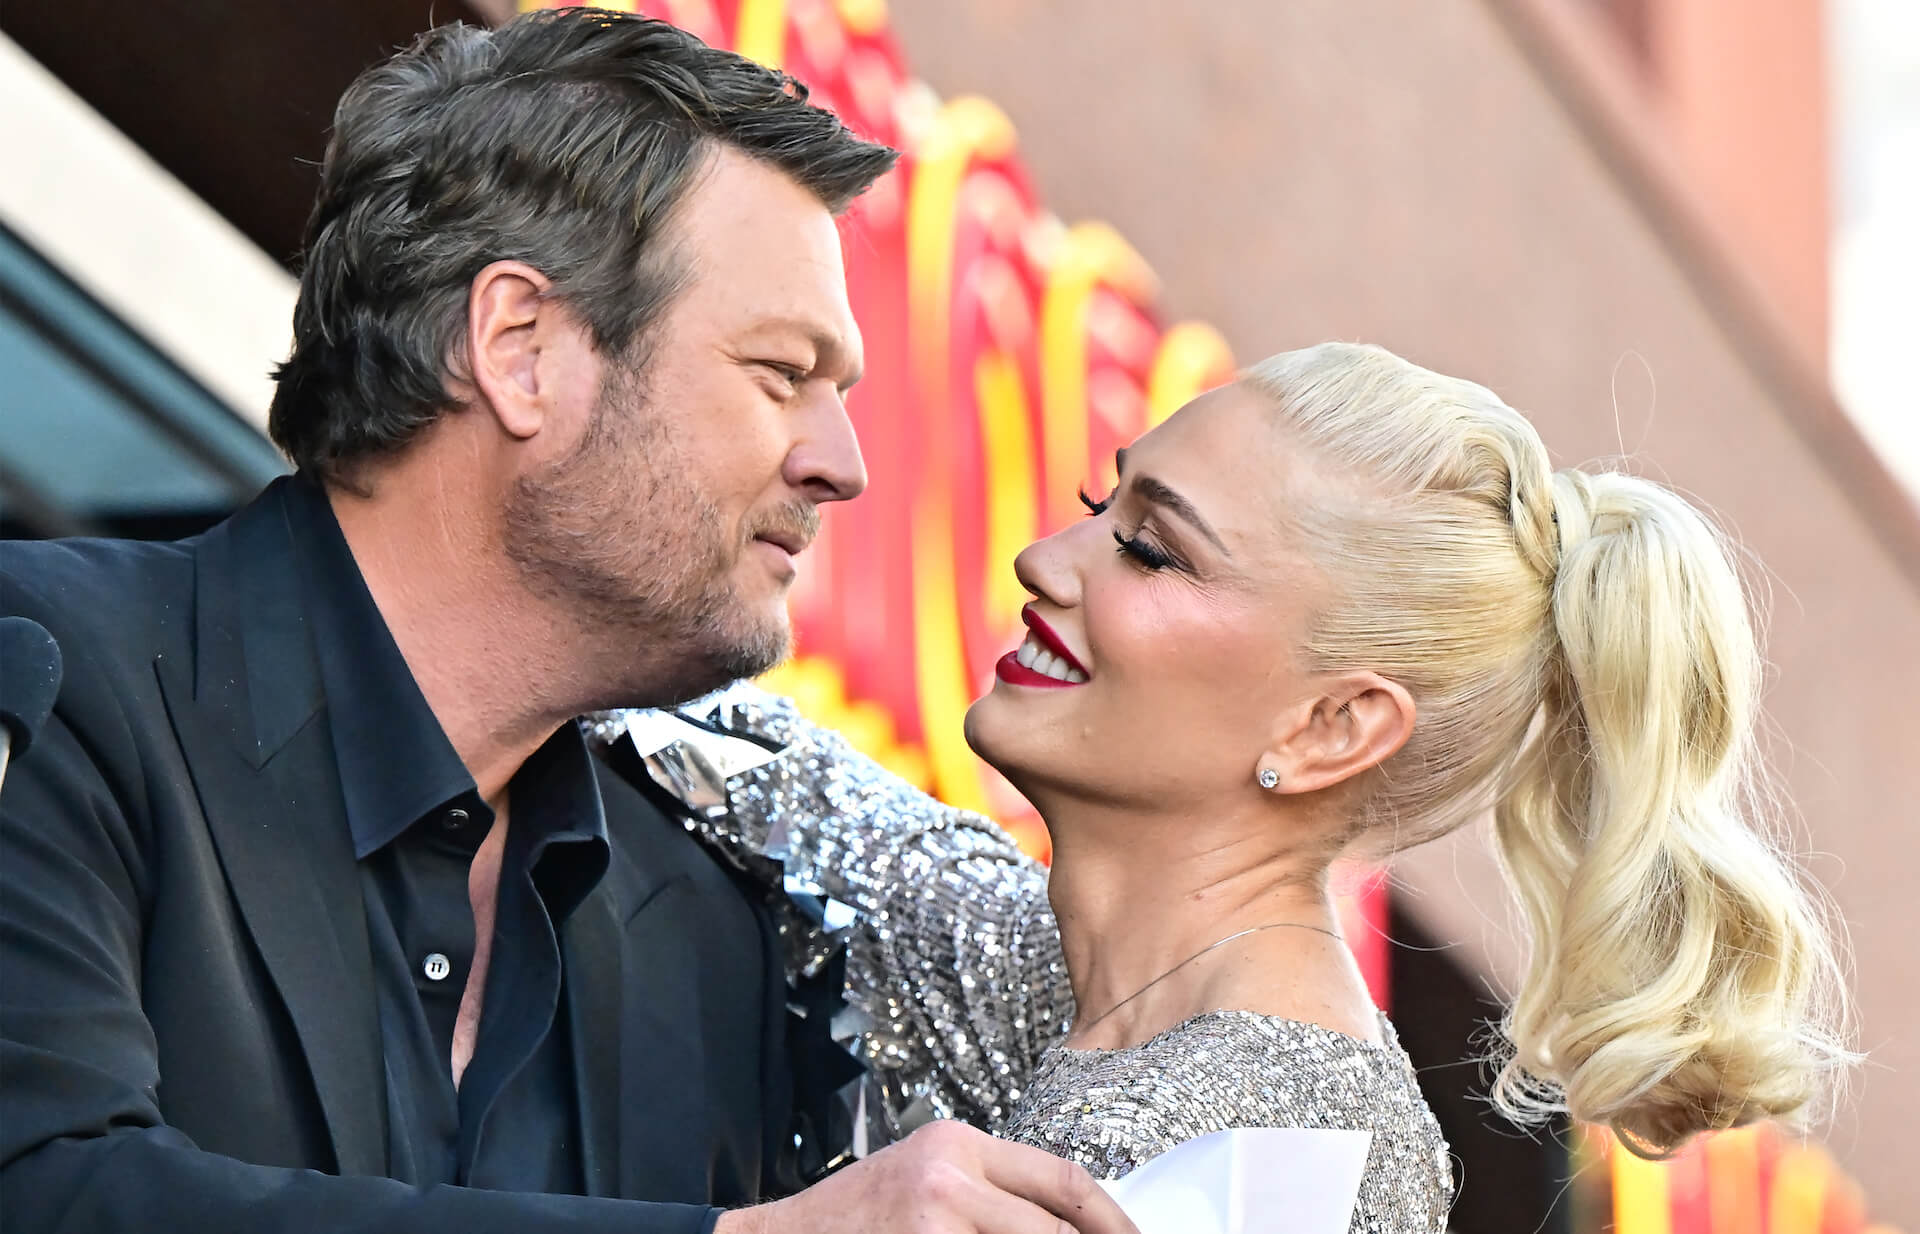 A close-up of Blake Shelton looking into Gwen Stefani's eyes as they embraced